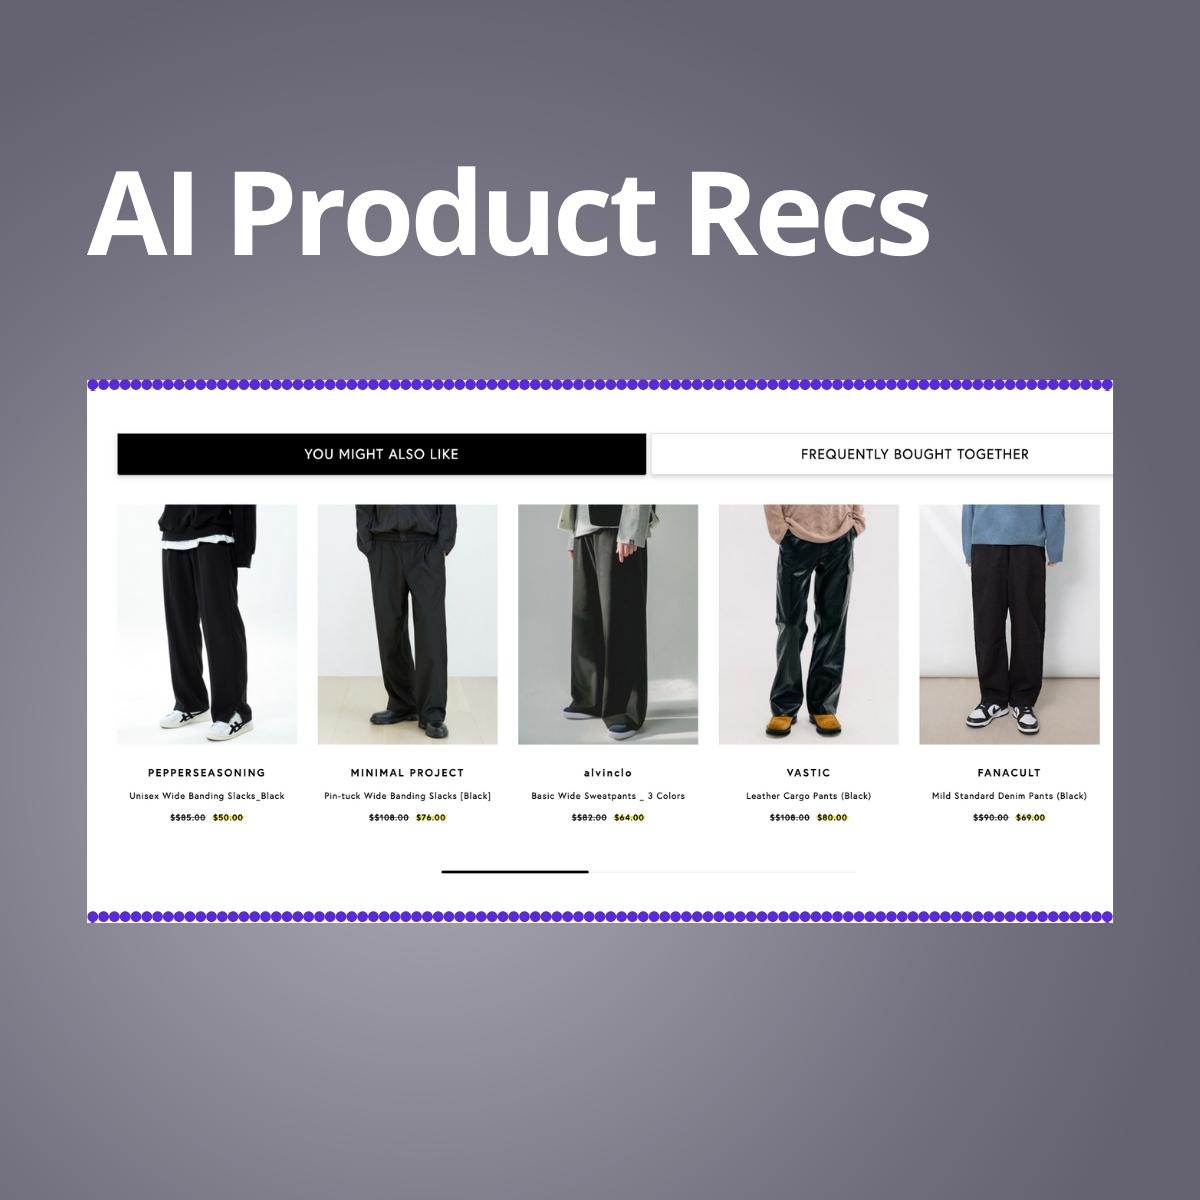 AI product recommendations for black baggy pants help the Ecommerce discovery journey